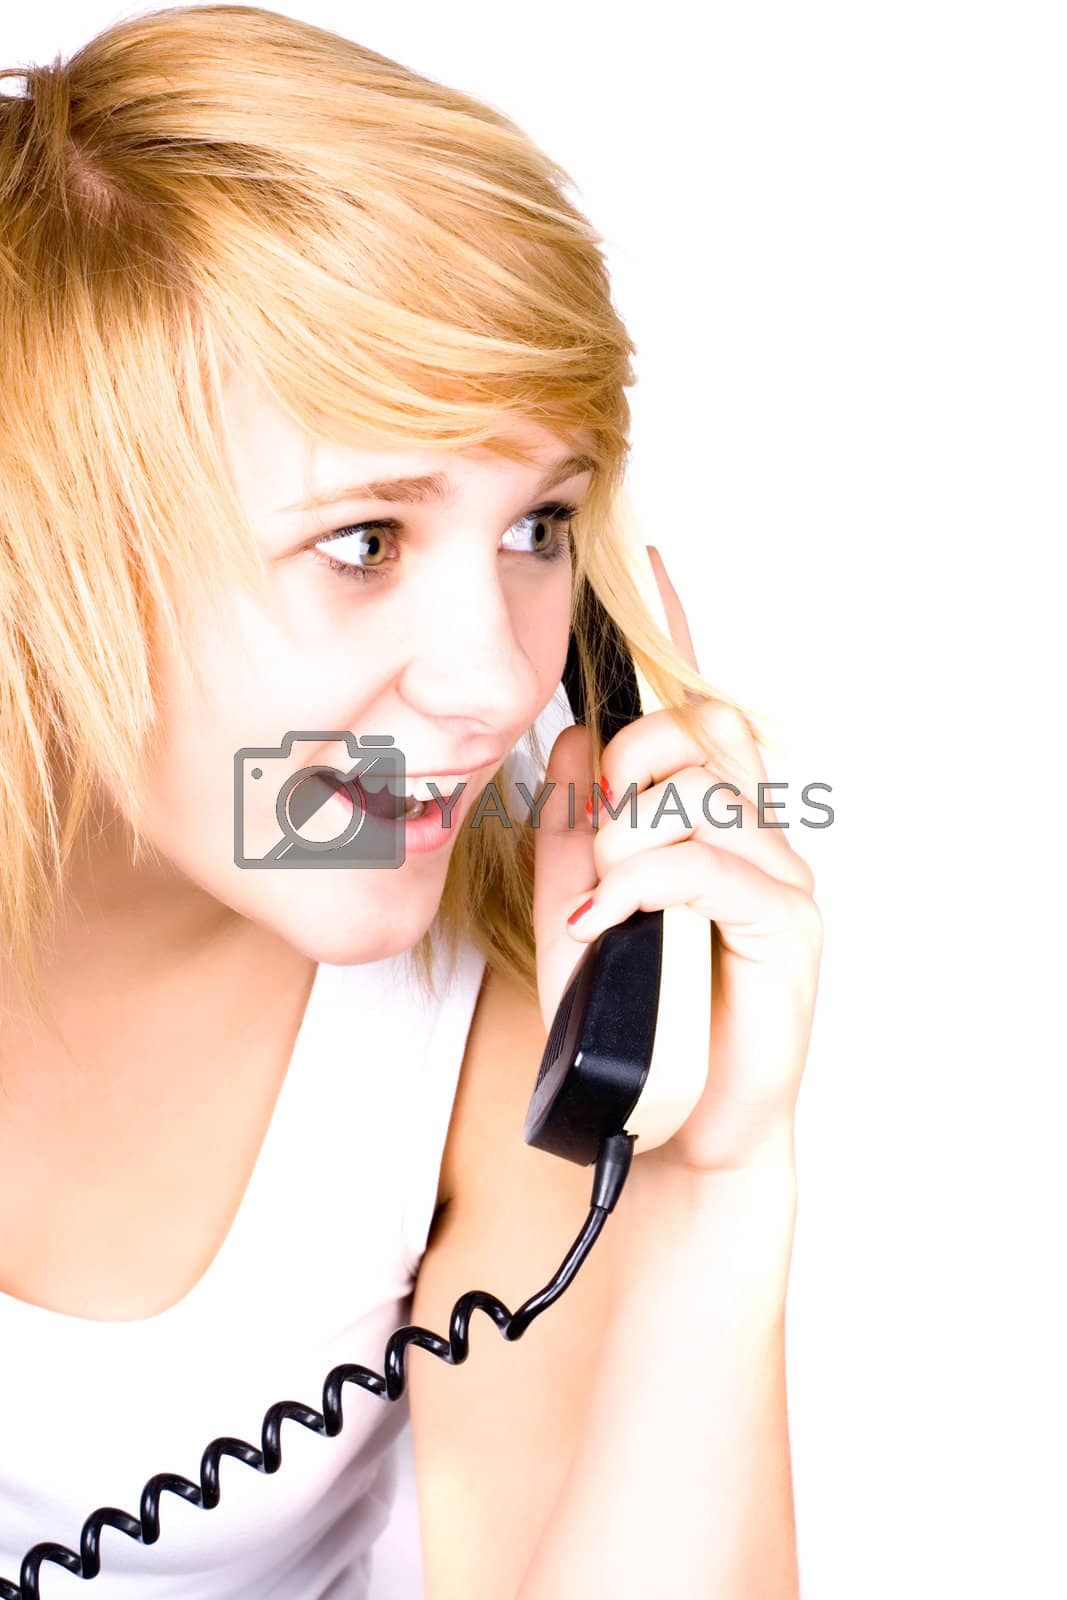 Royalty free image of woman with retro telephone by marylooo